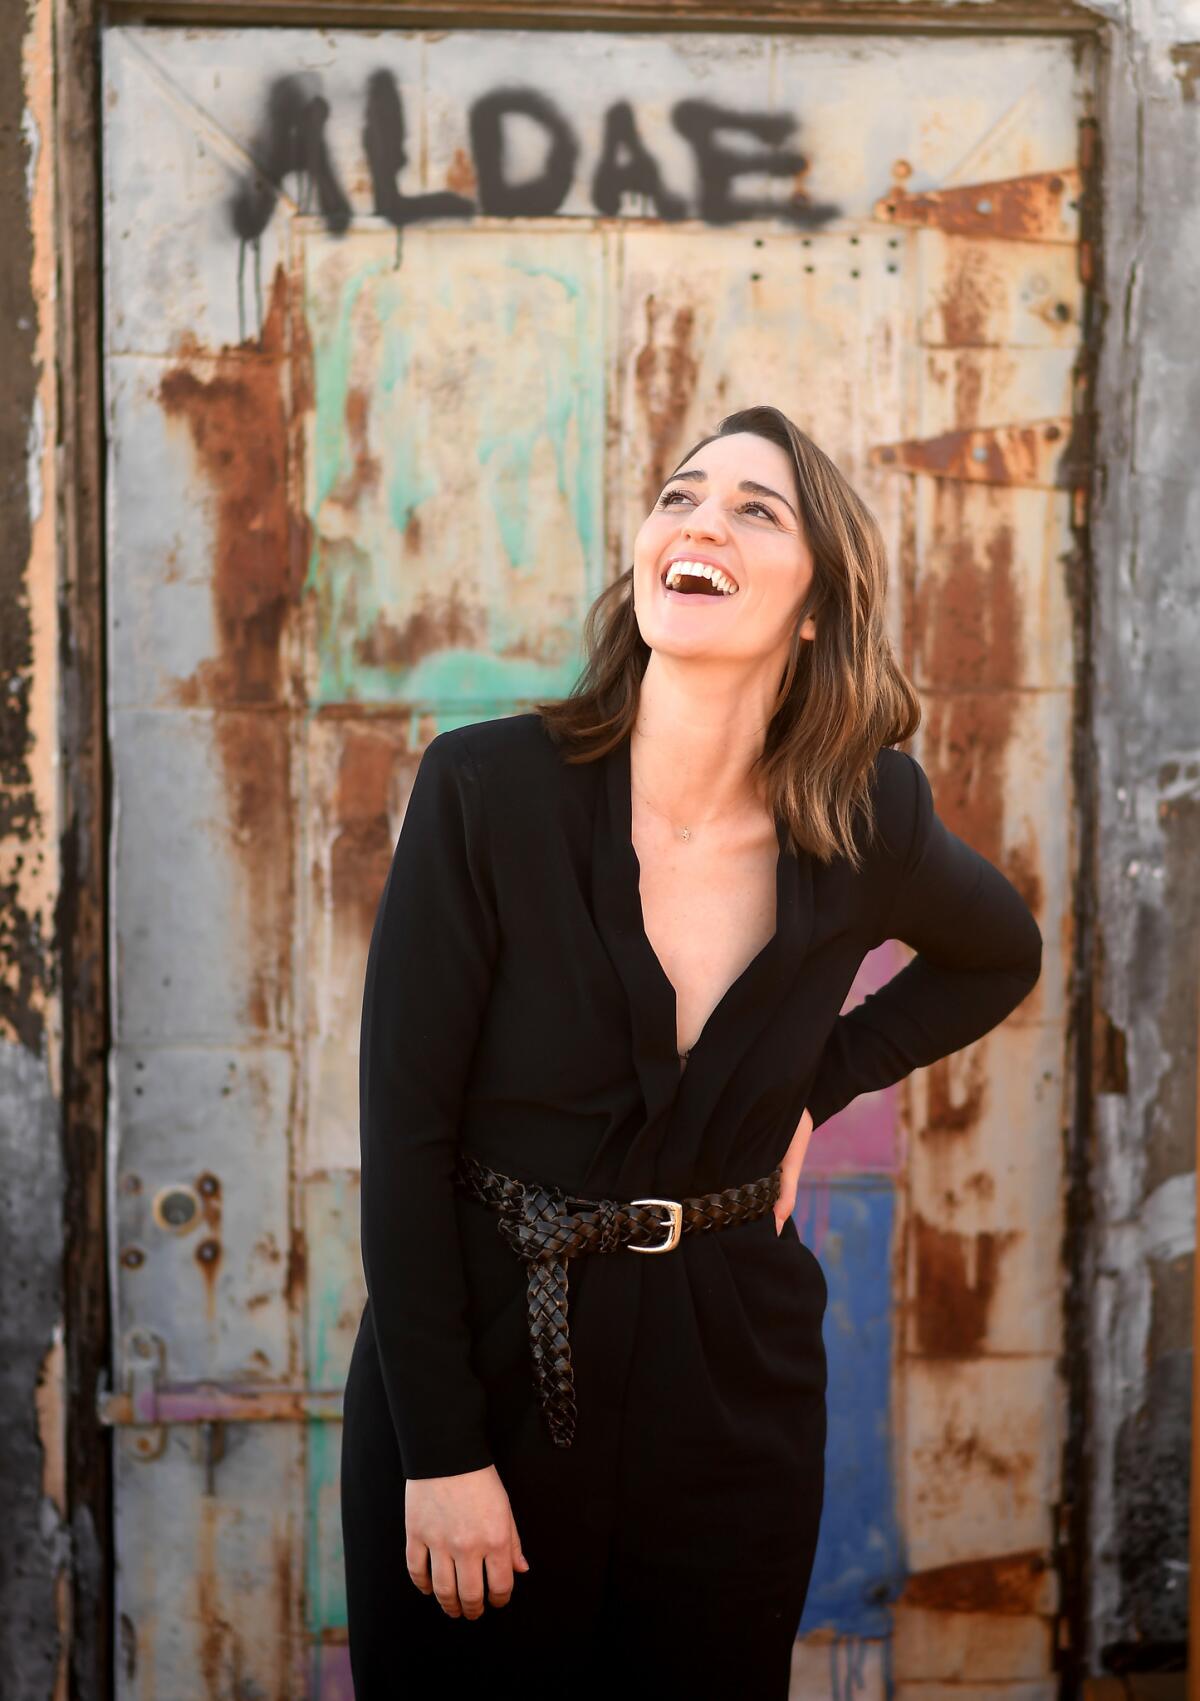 "Amidst the Chaos" is Bareilles' follow-up to 2013's "The Blessed Unrest."